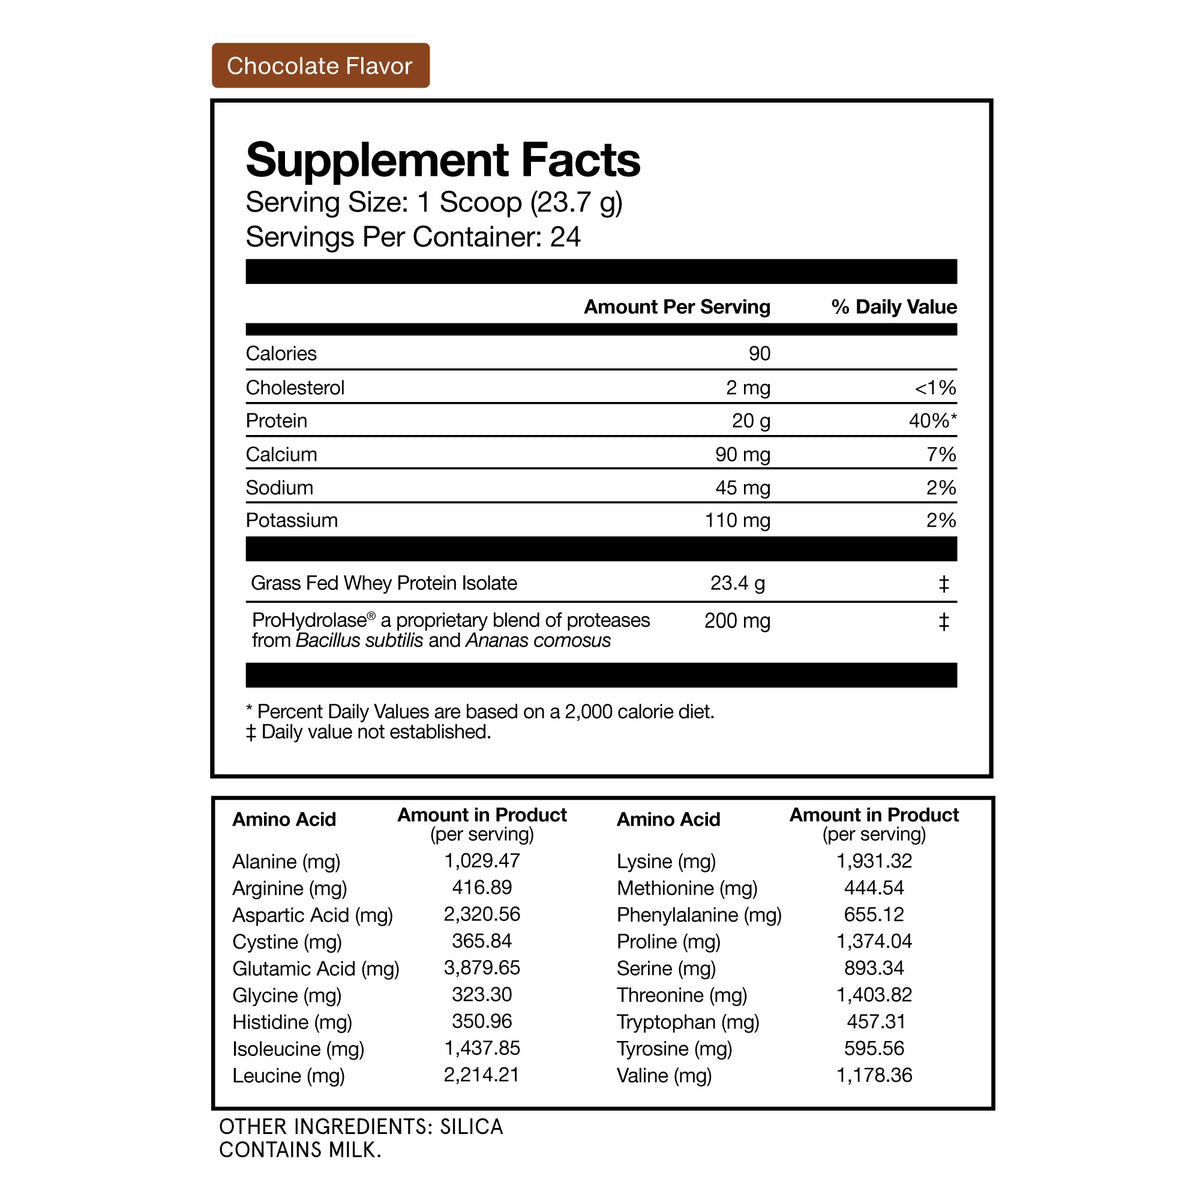 Chocolate Flavored Grass Fed Whey Protein Isolate Powder Supplement Facts